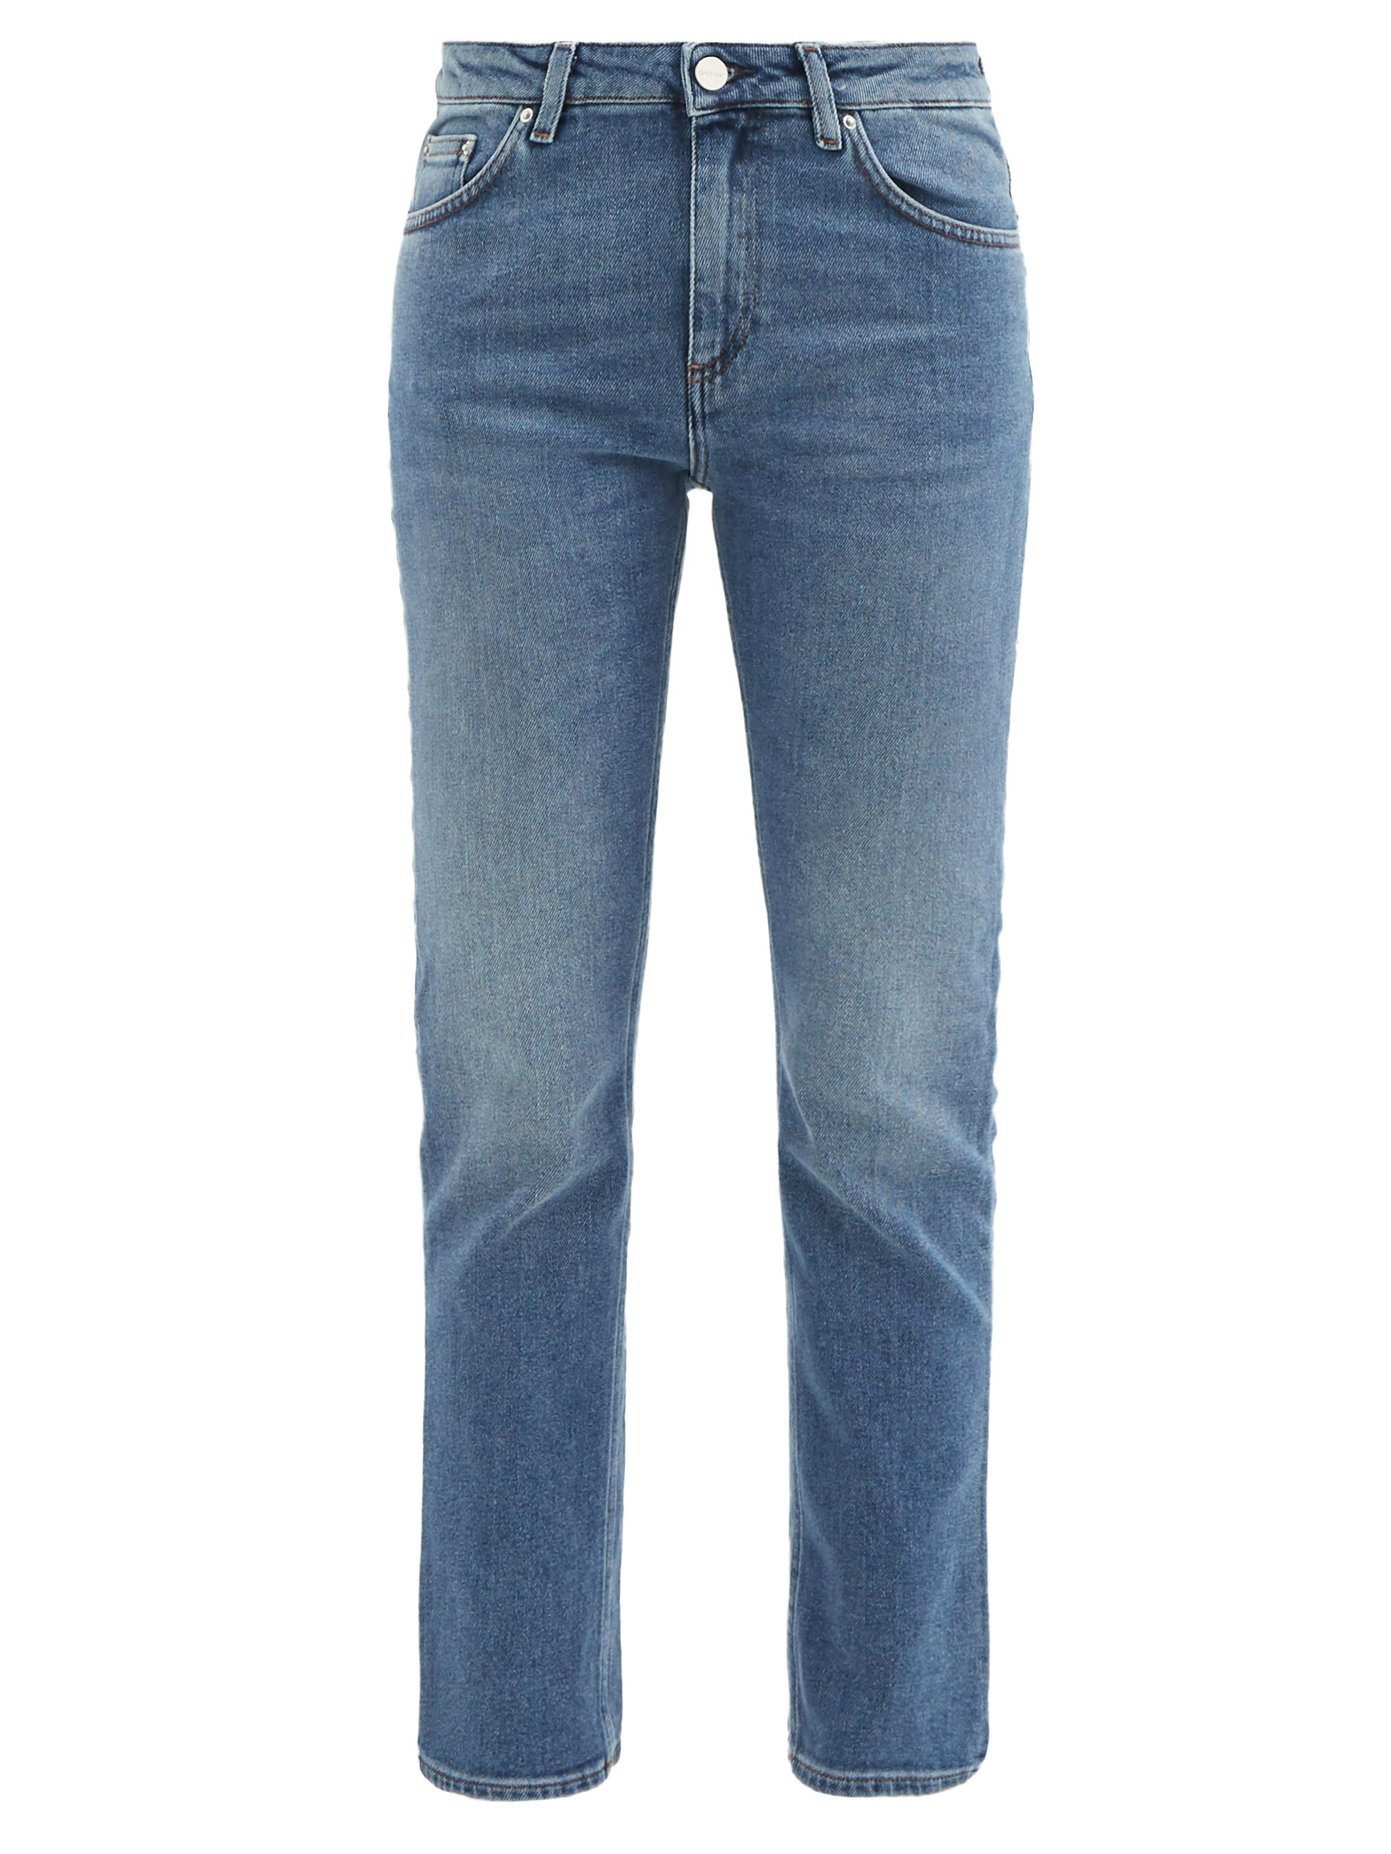 Womens Straight Leg Mid Rise Jeans find